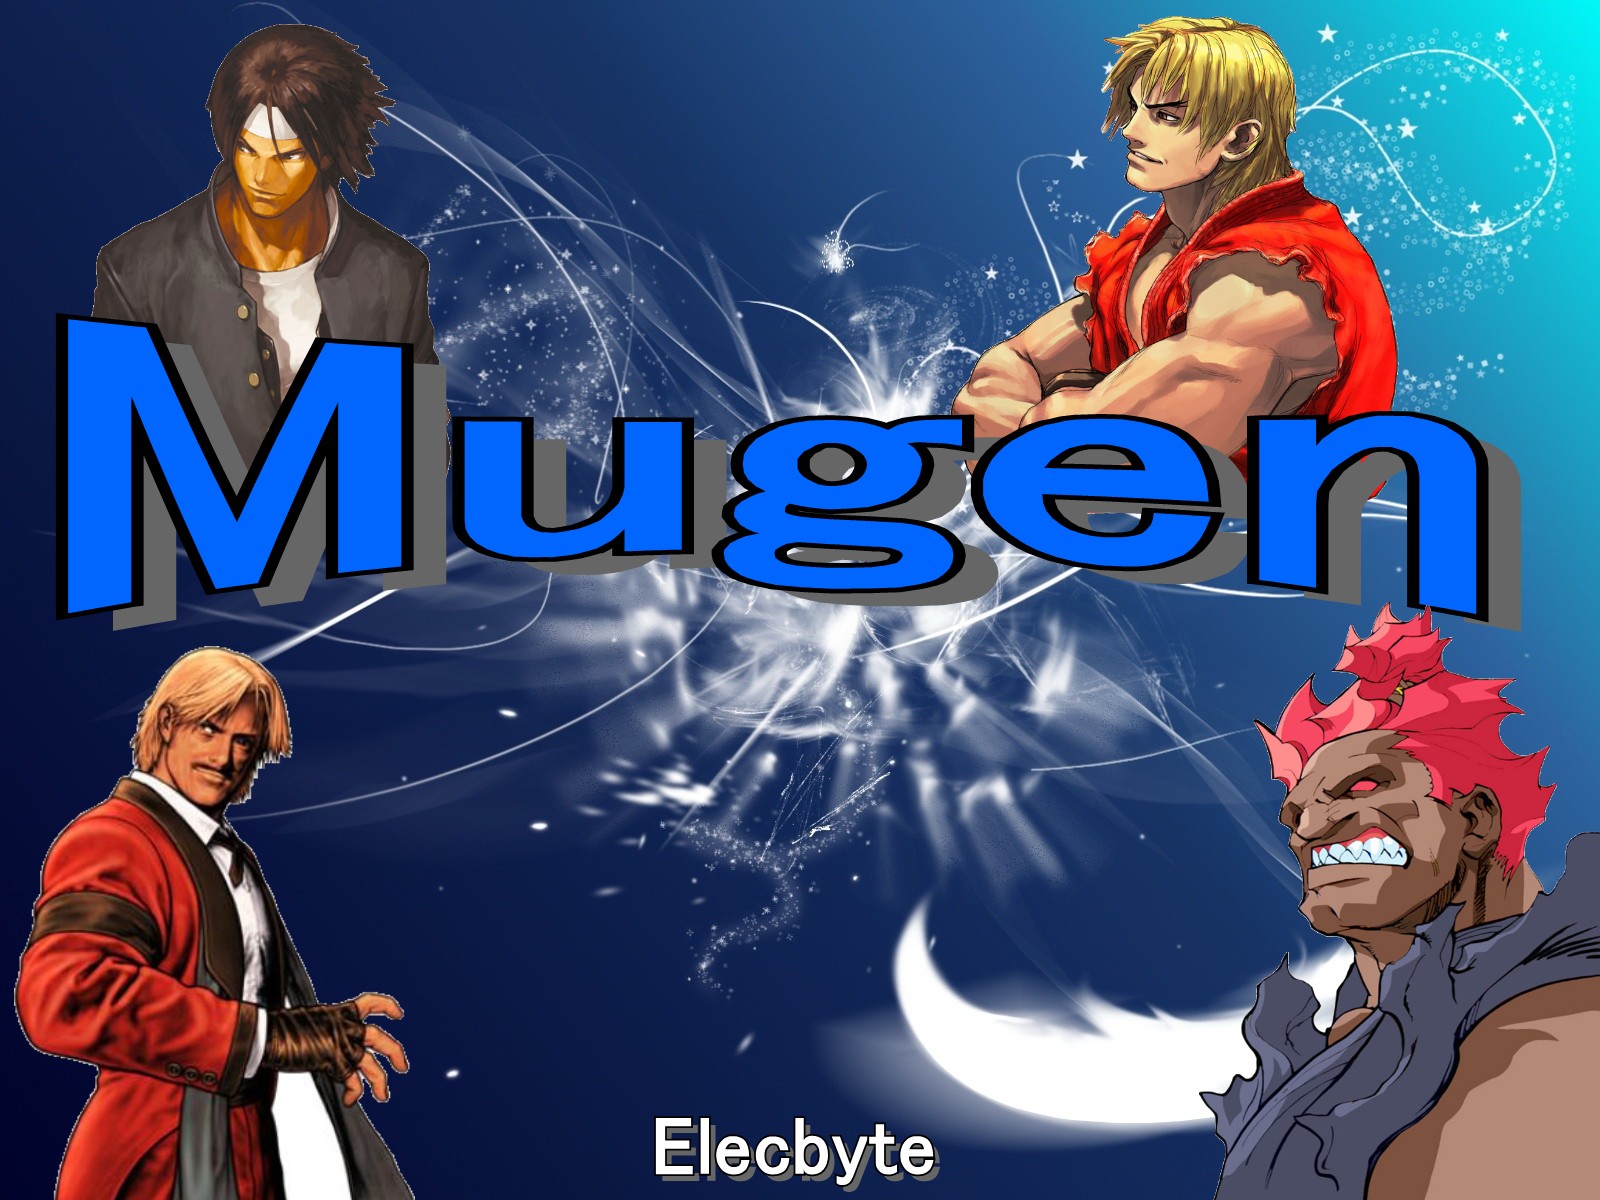 tool winmugen character to mugen 1.0